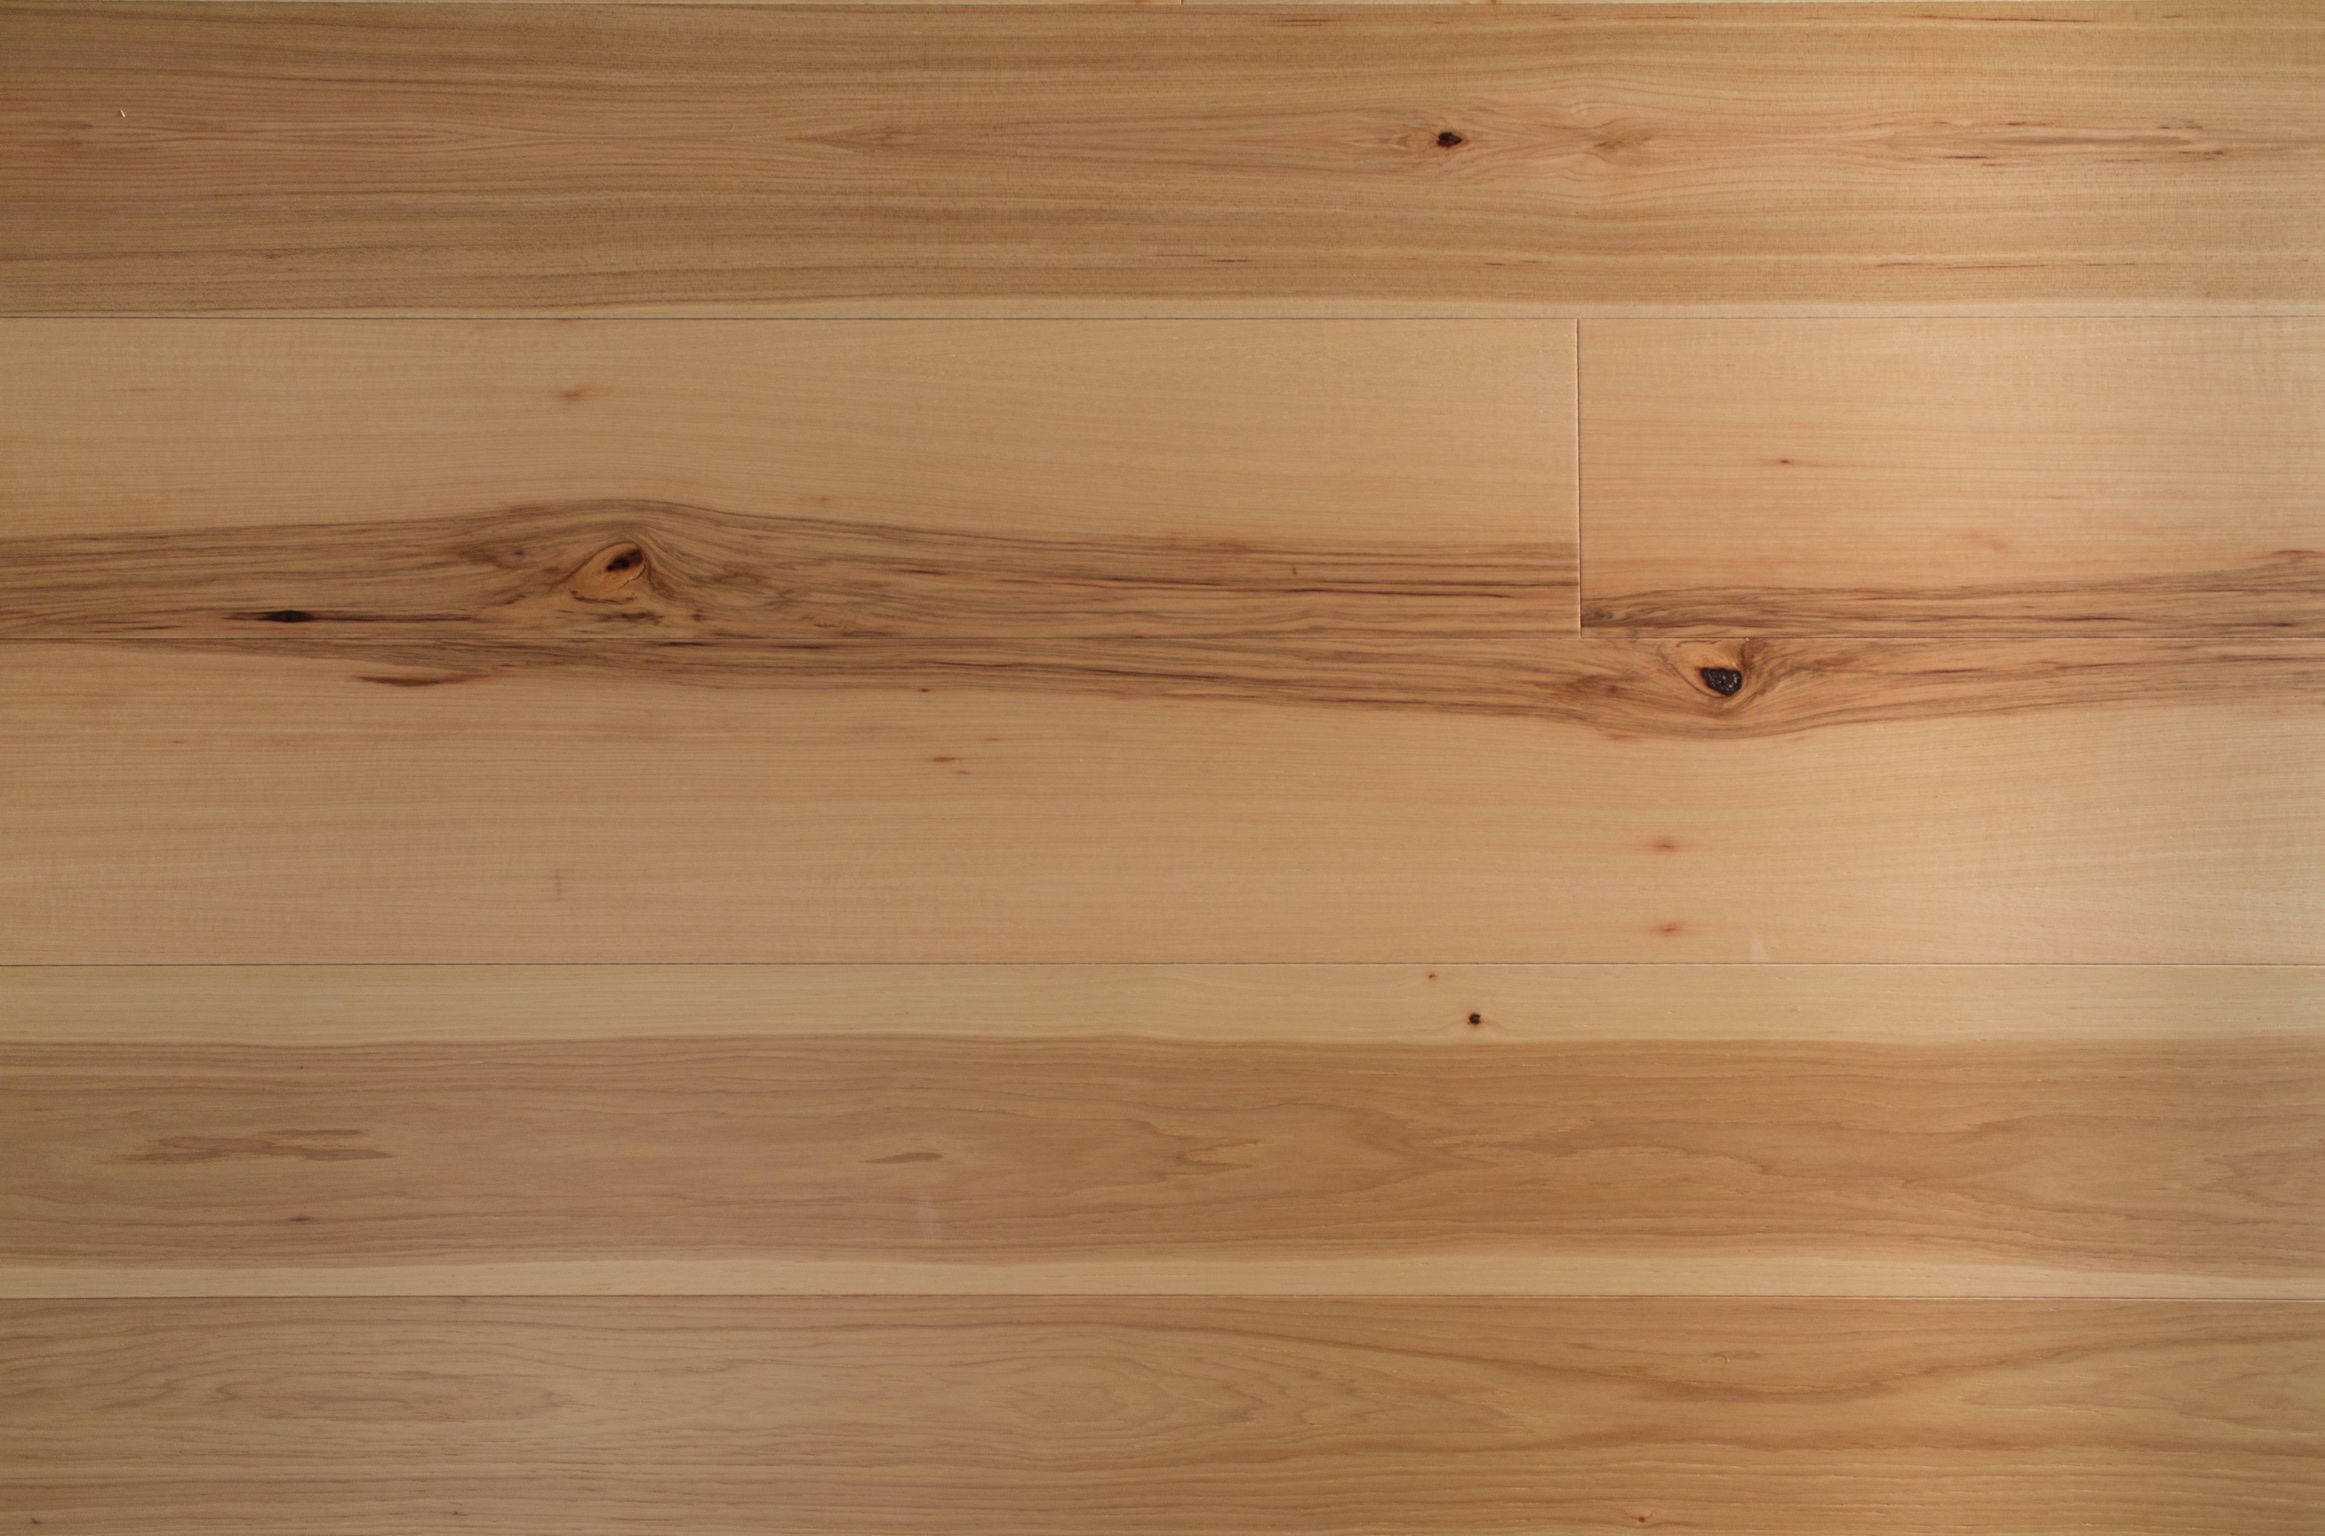 hickory hardwood flooring for sale of hickory hardwood flooring wide plank natural hickory hdf hardwood regarding hickory hardwood flooring wide plank natural hickory hdf hardwood flooring